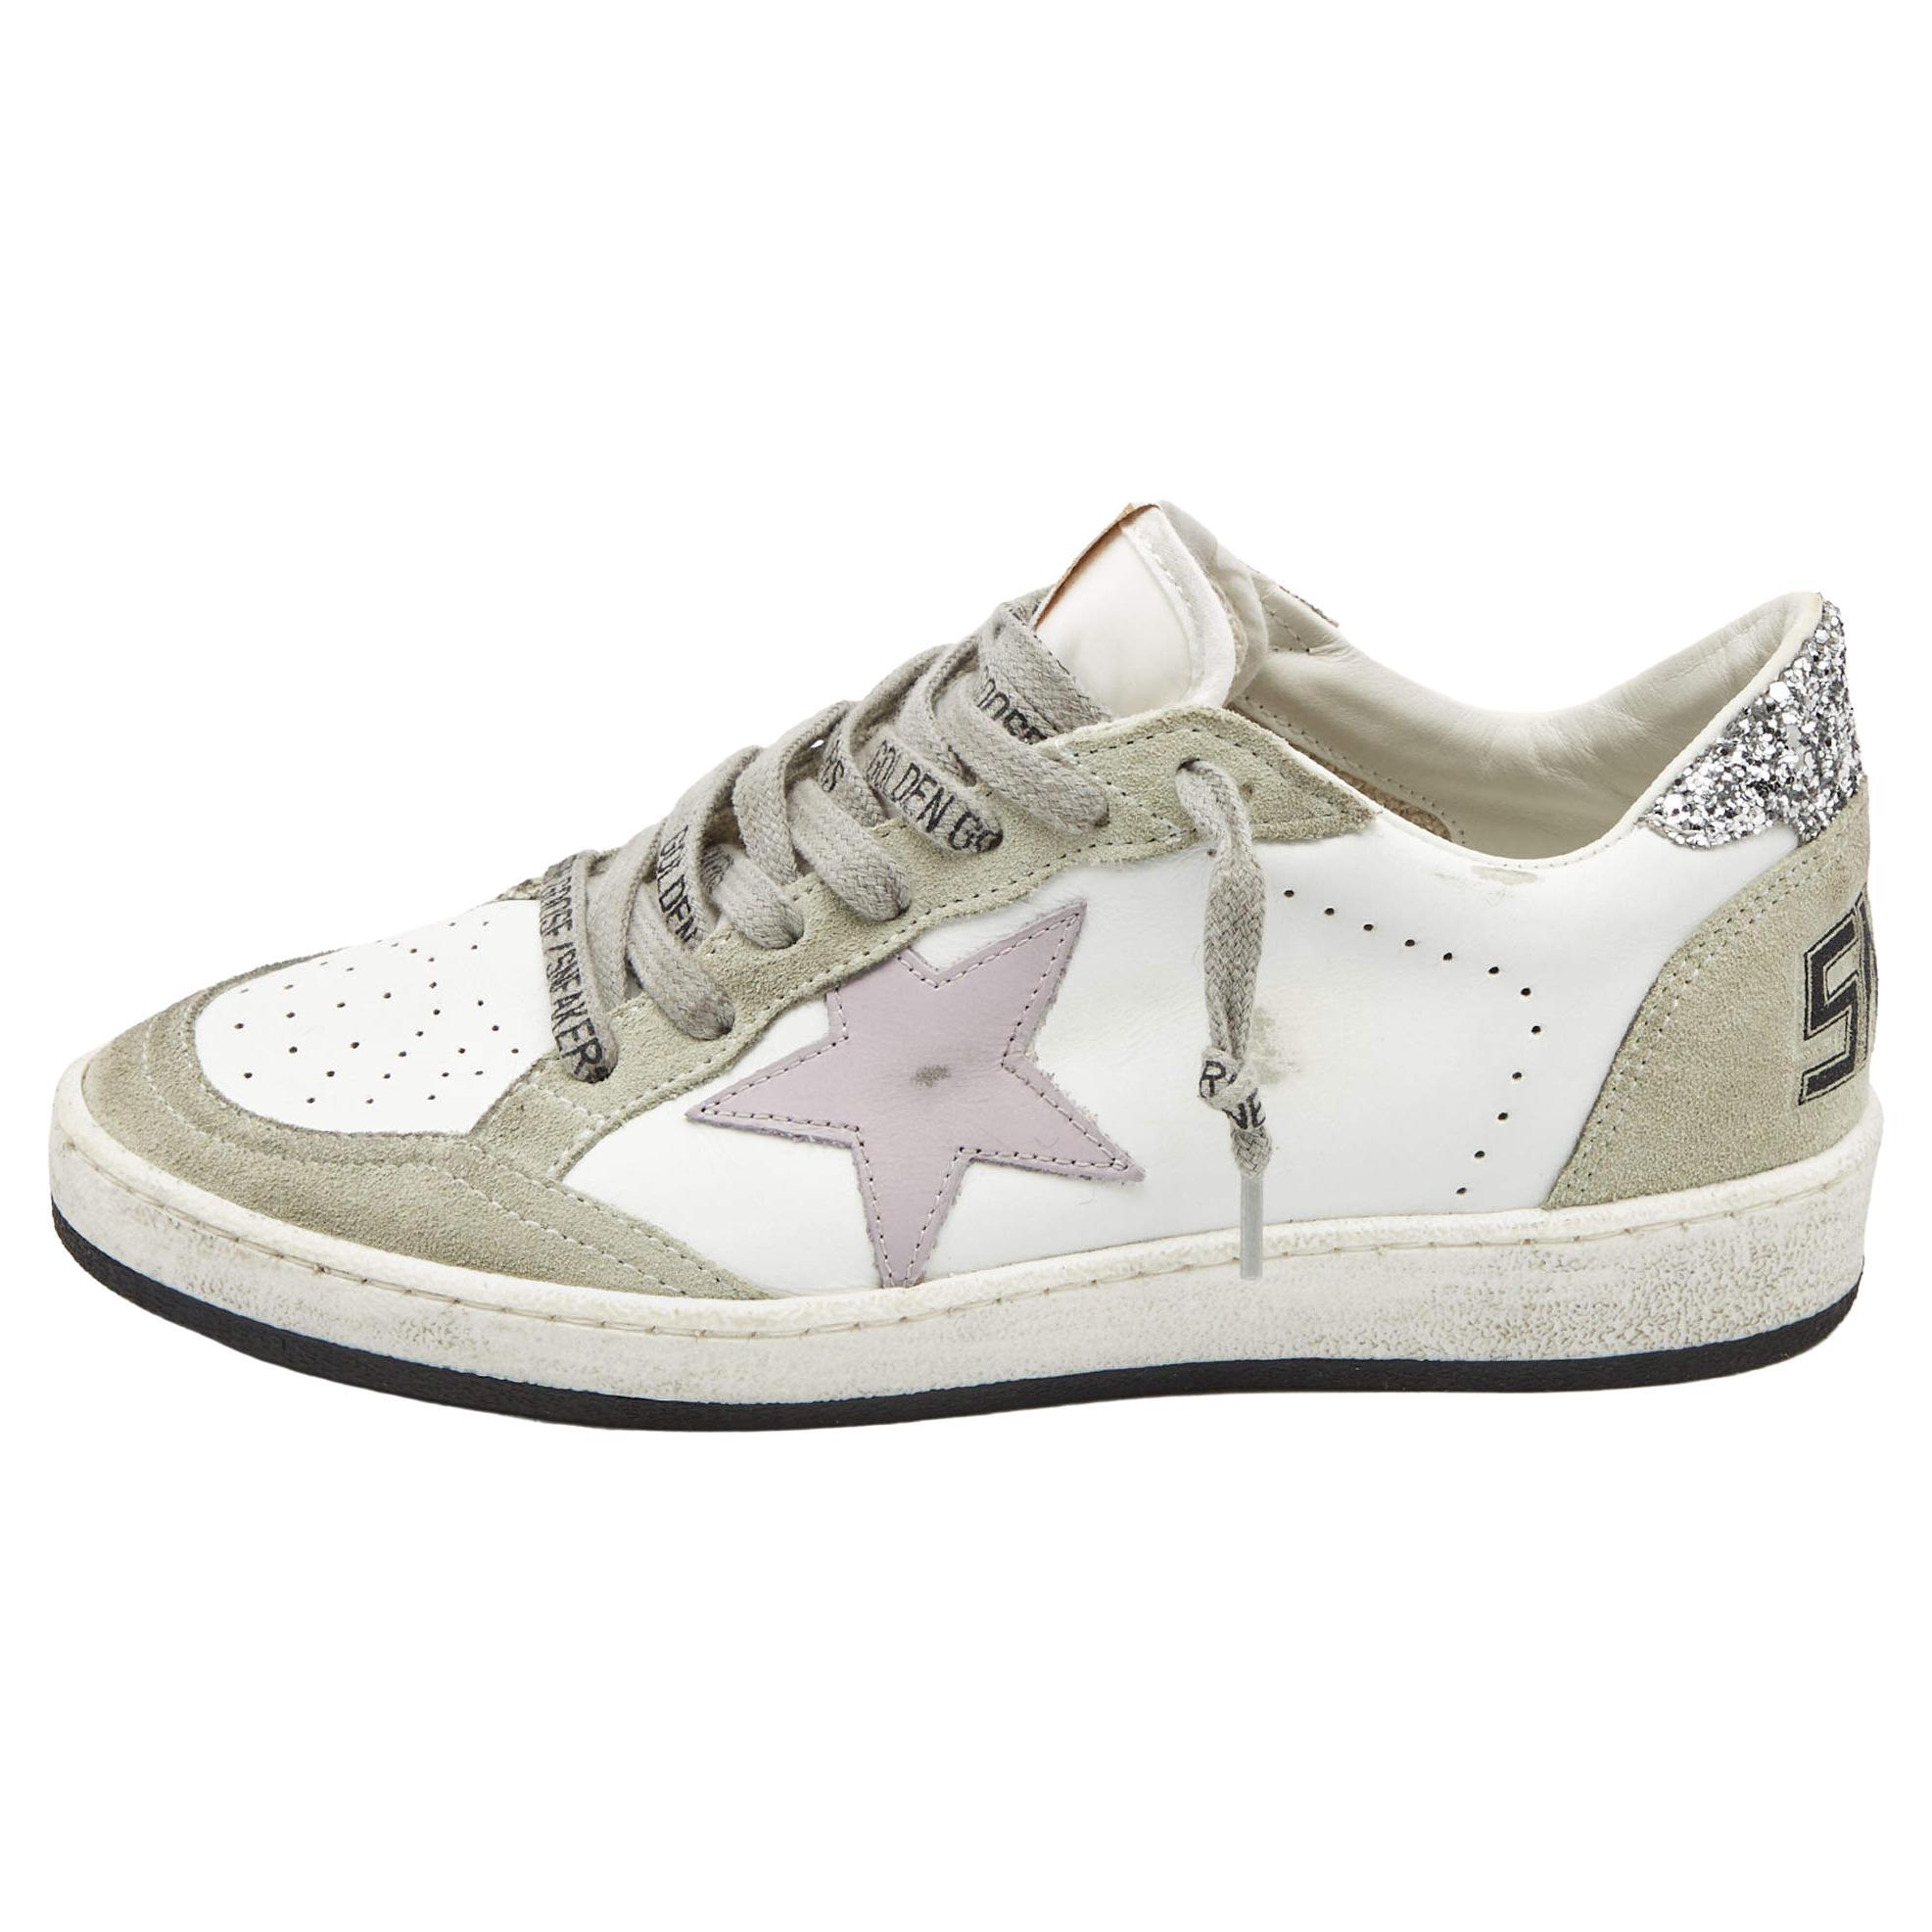 Golden Goose White/Grey Leather and Suede Ballstar Low Top Sneakers Size 37